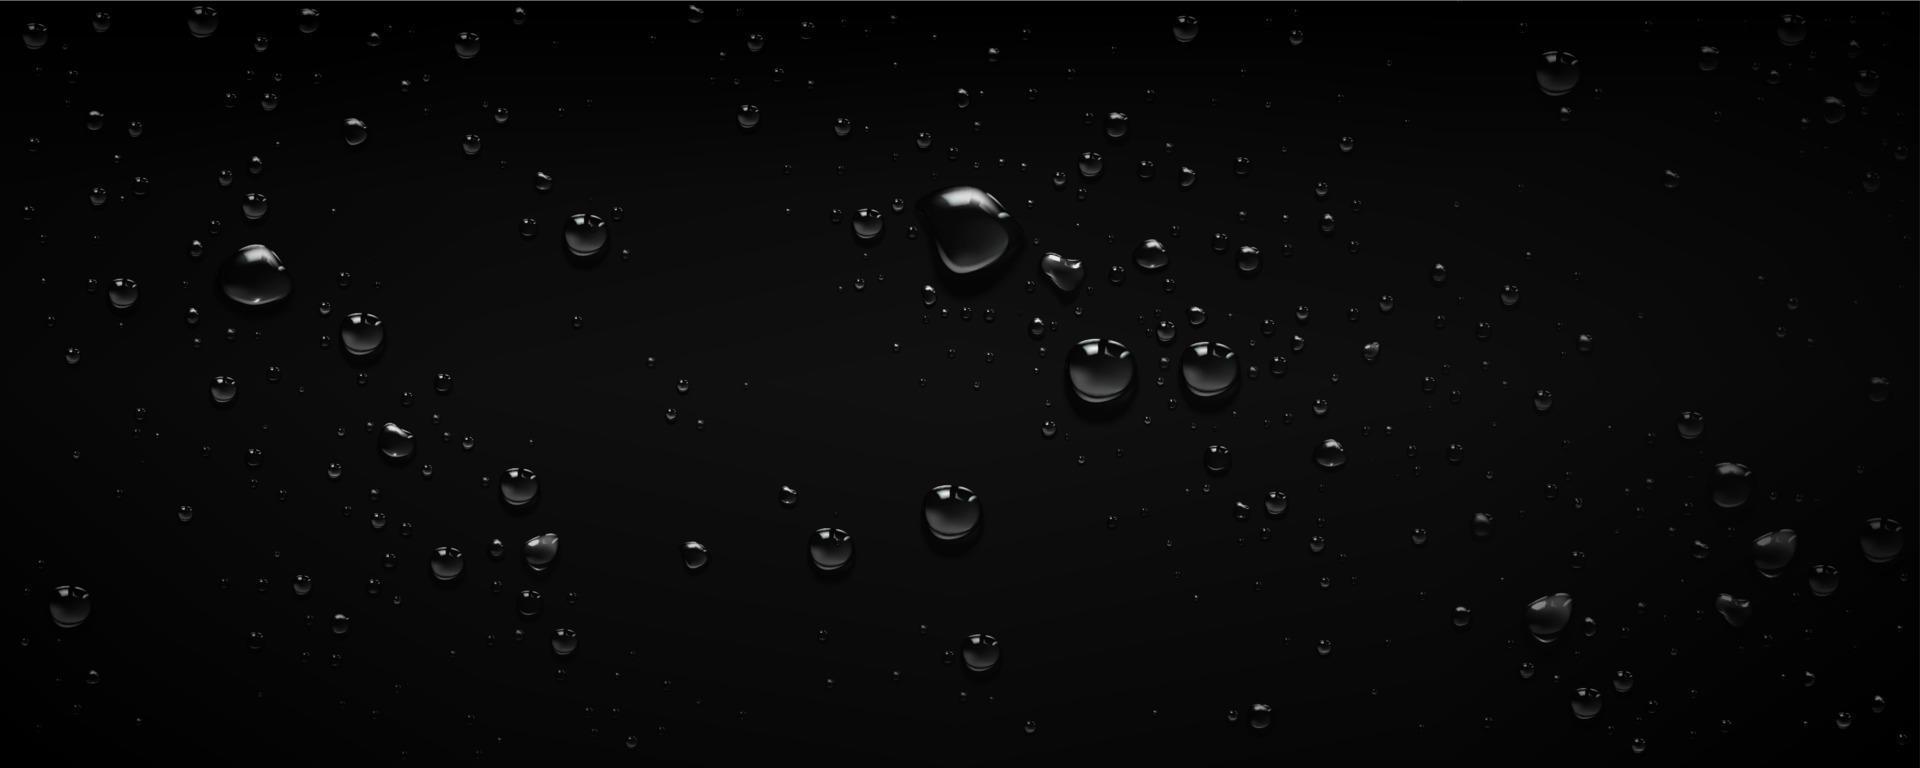 Black background with clear water drops vector